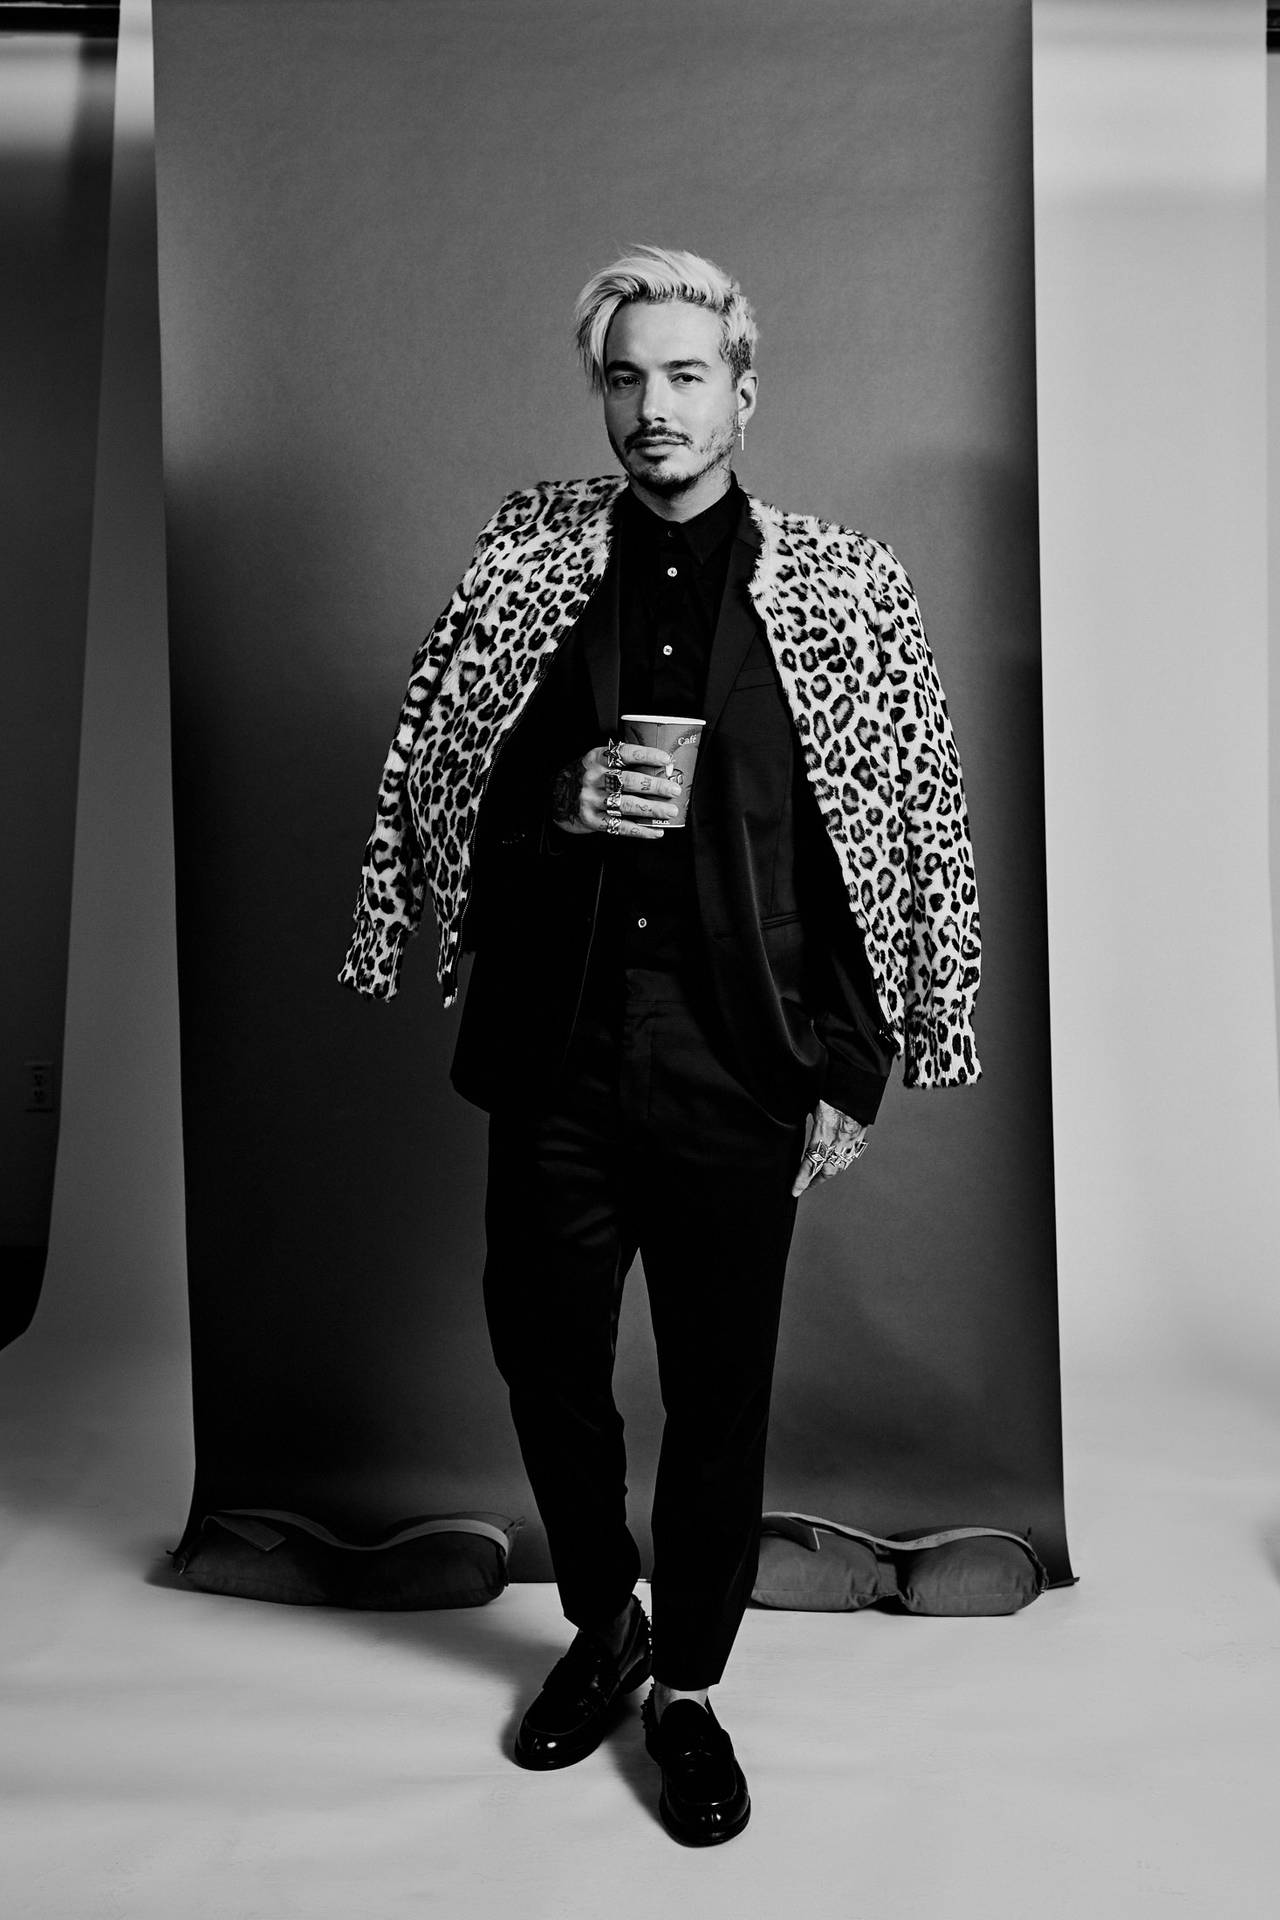 J Balvin For Esquire Mexico Background